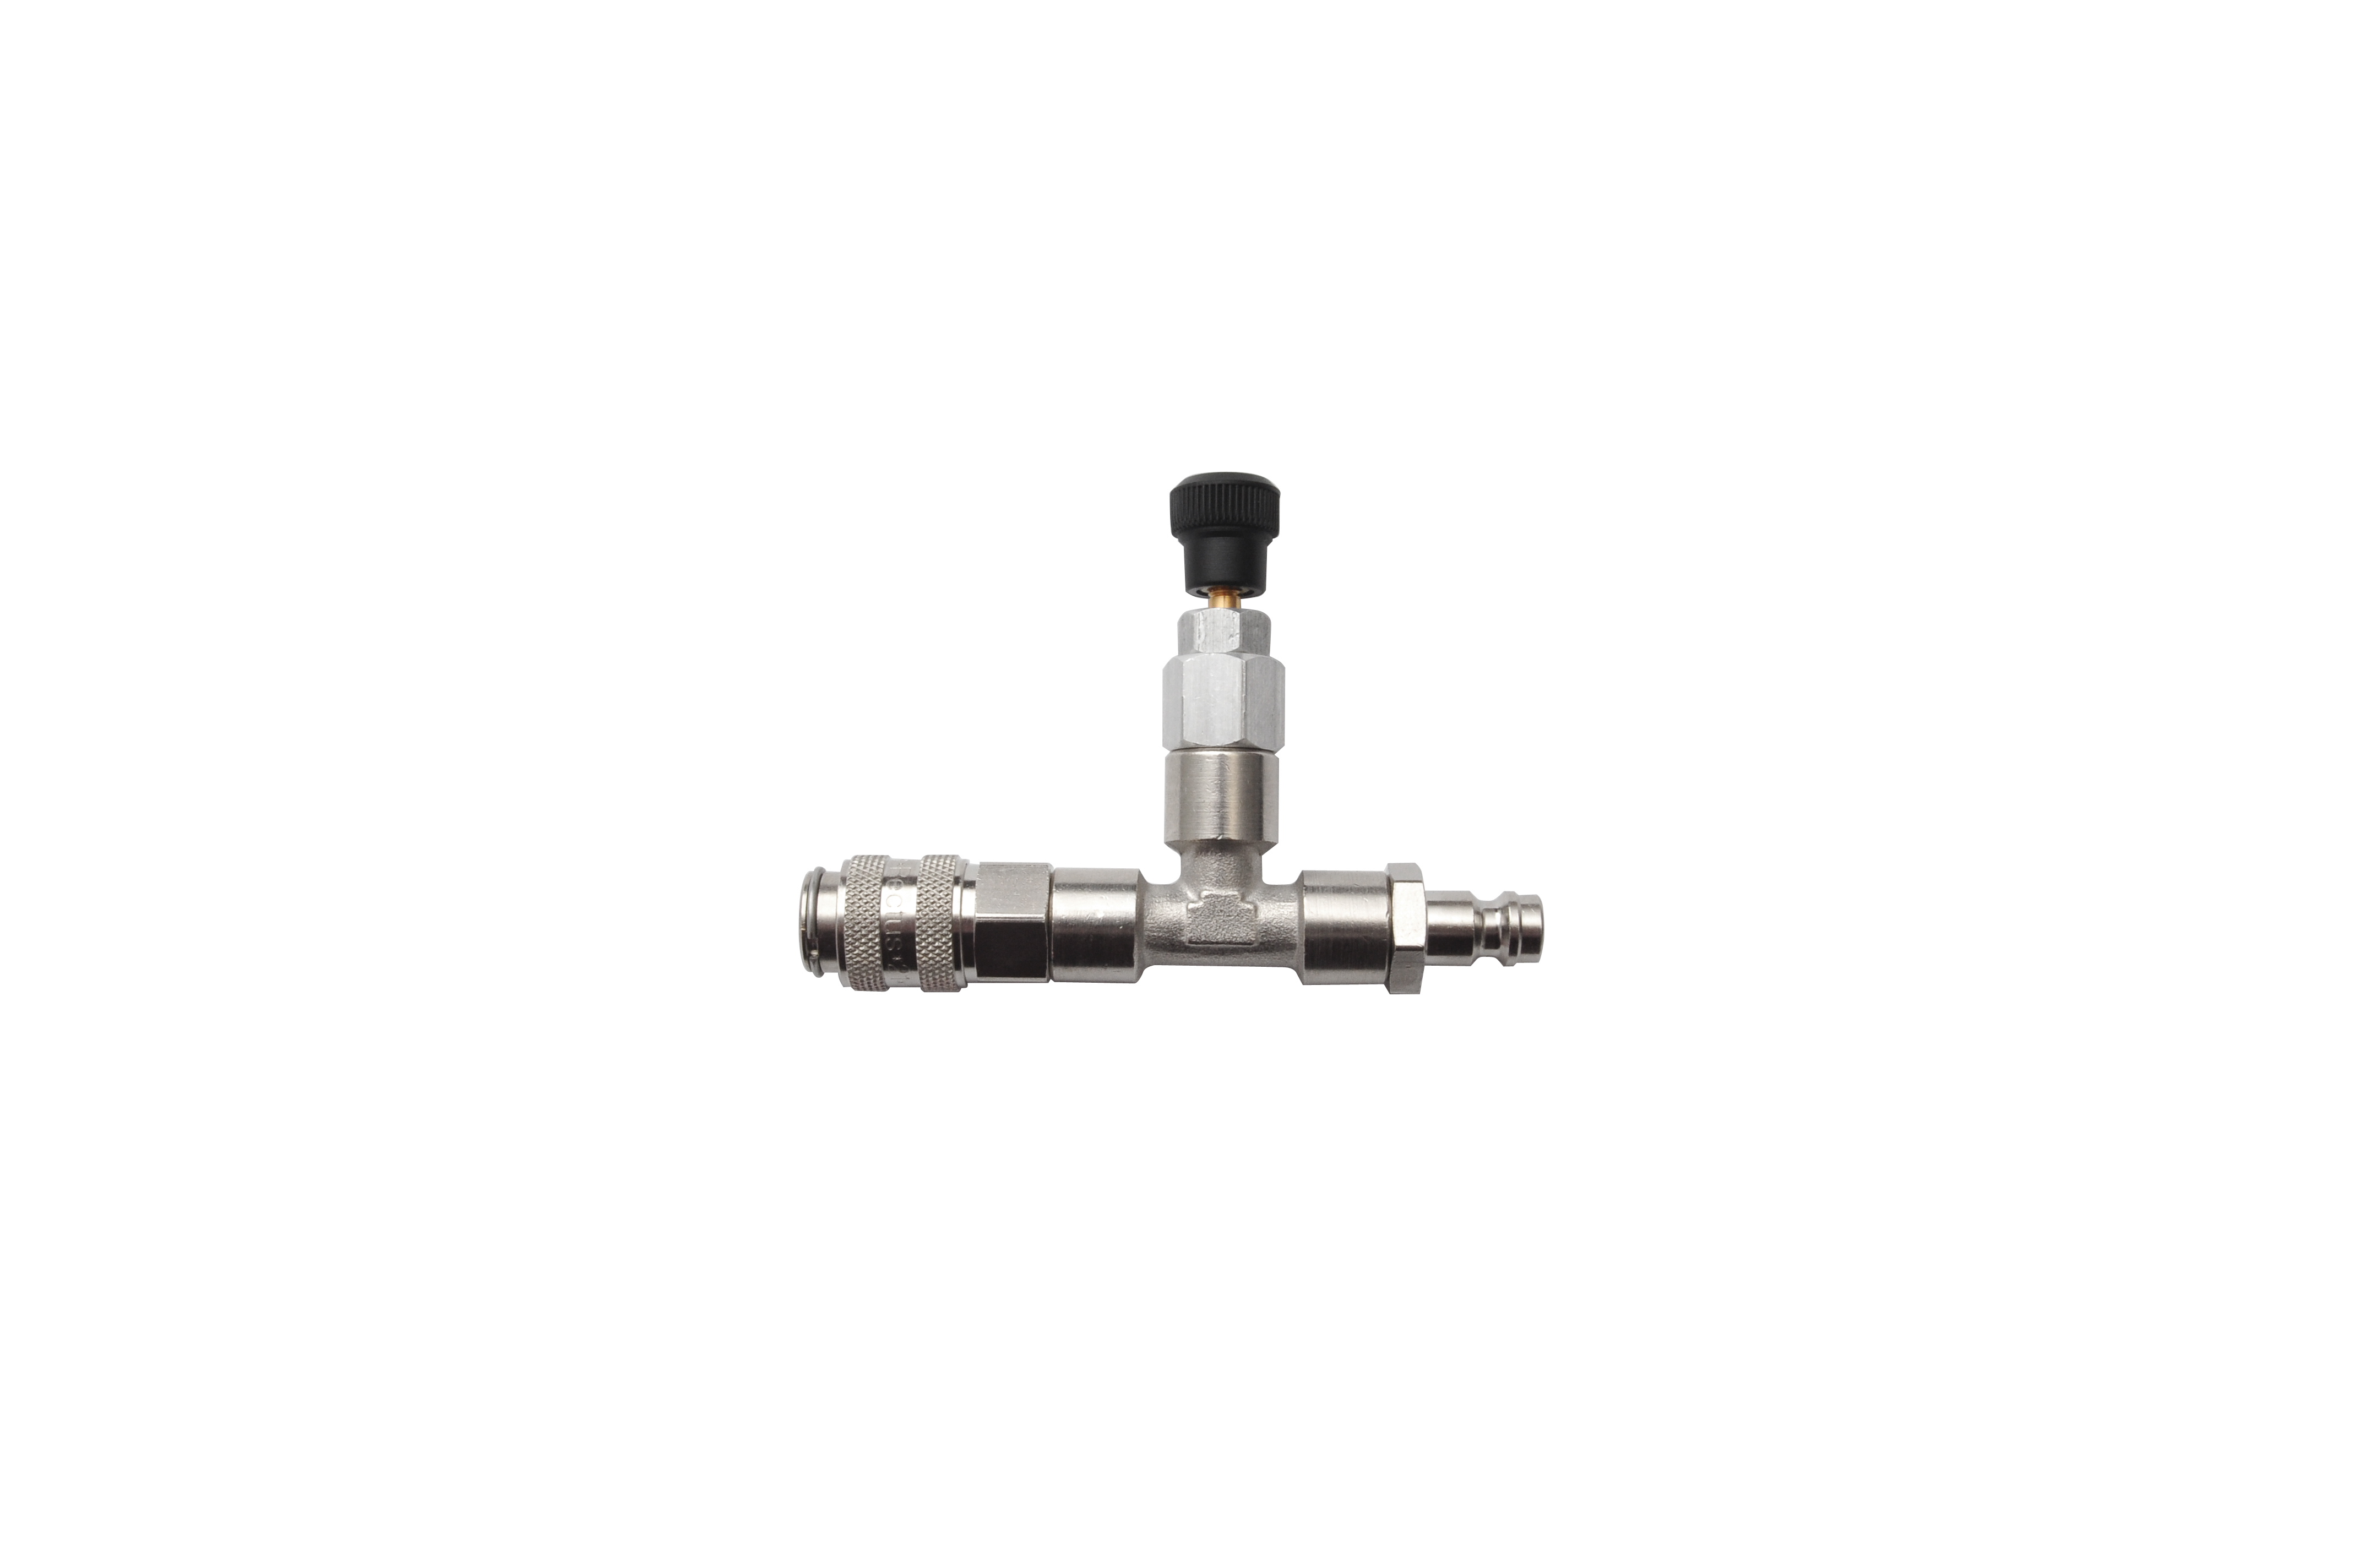 Drain valve T-piece with coupling series 21 and nipple series 21